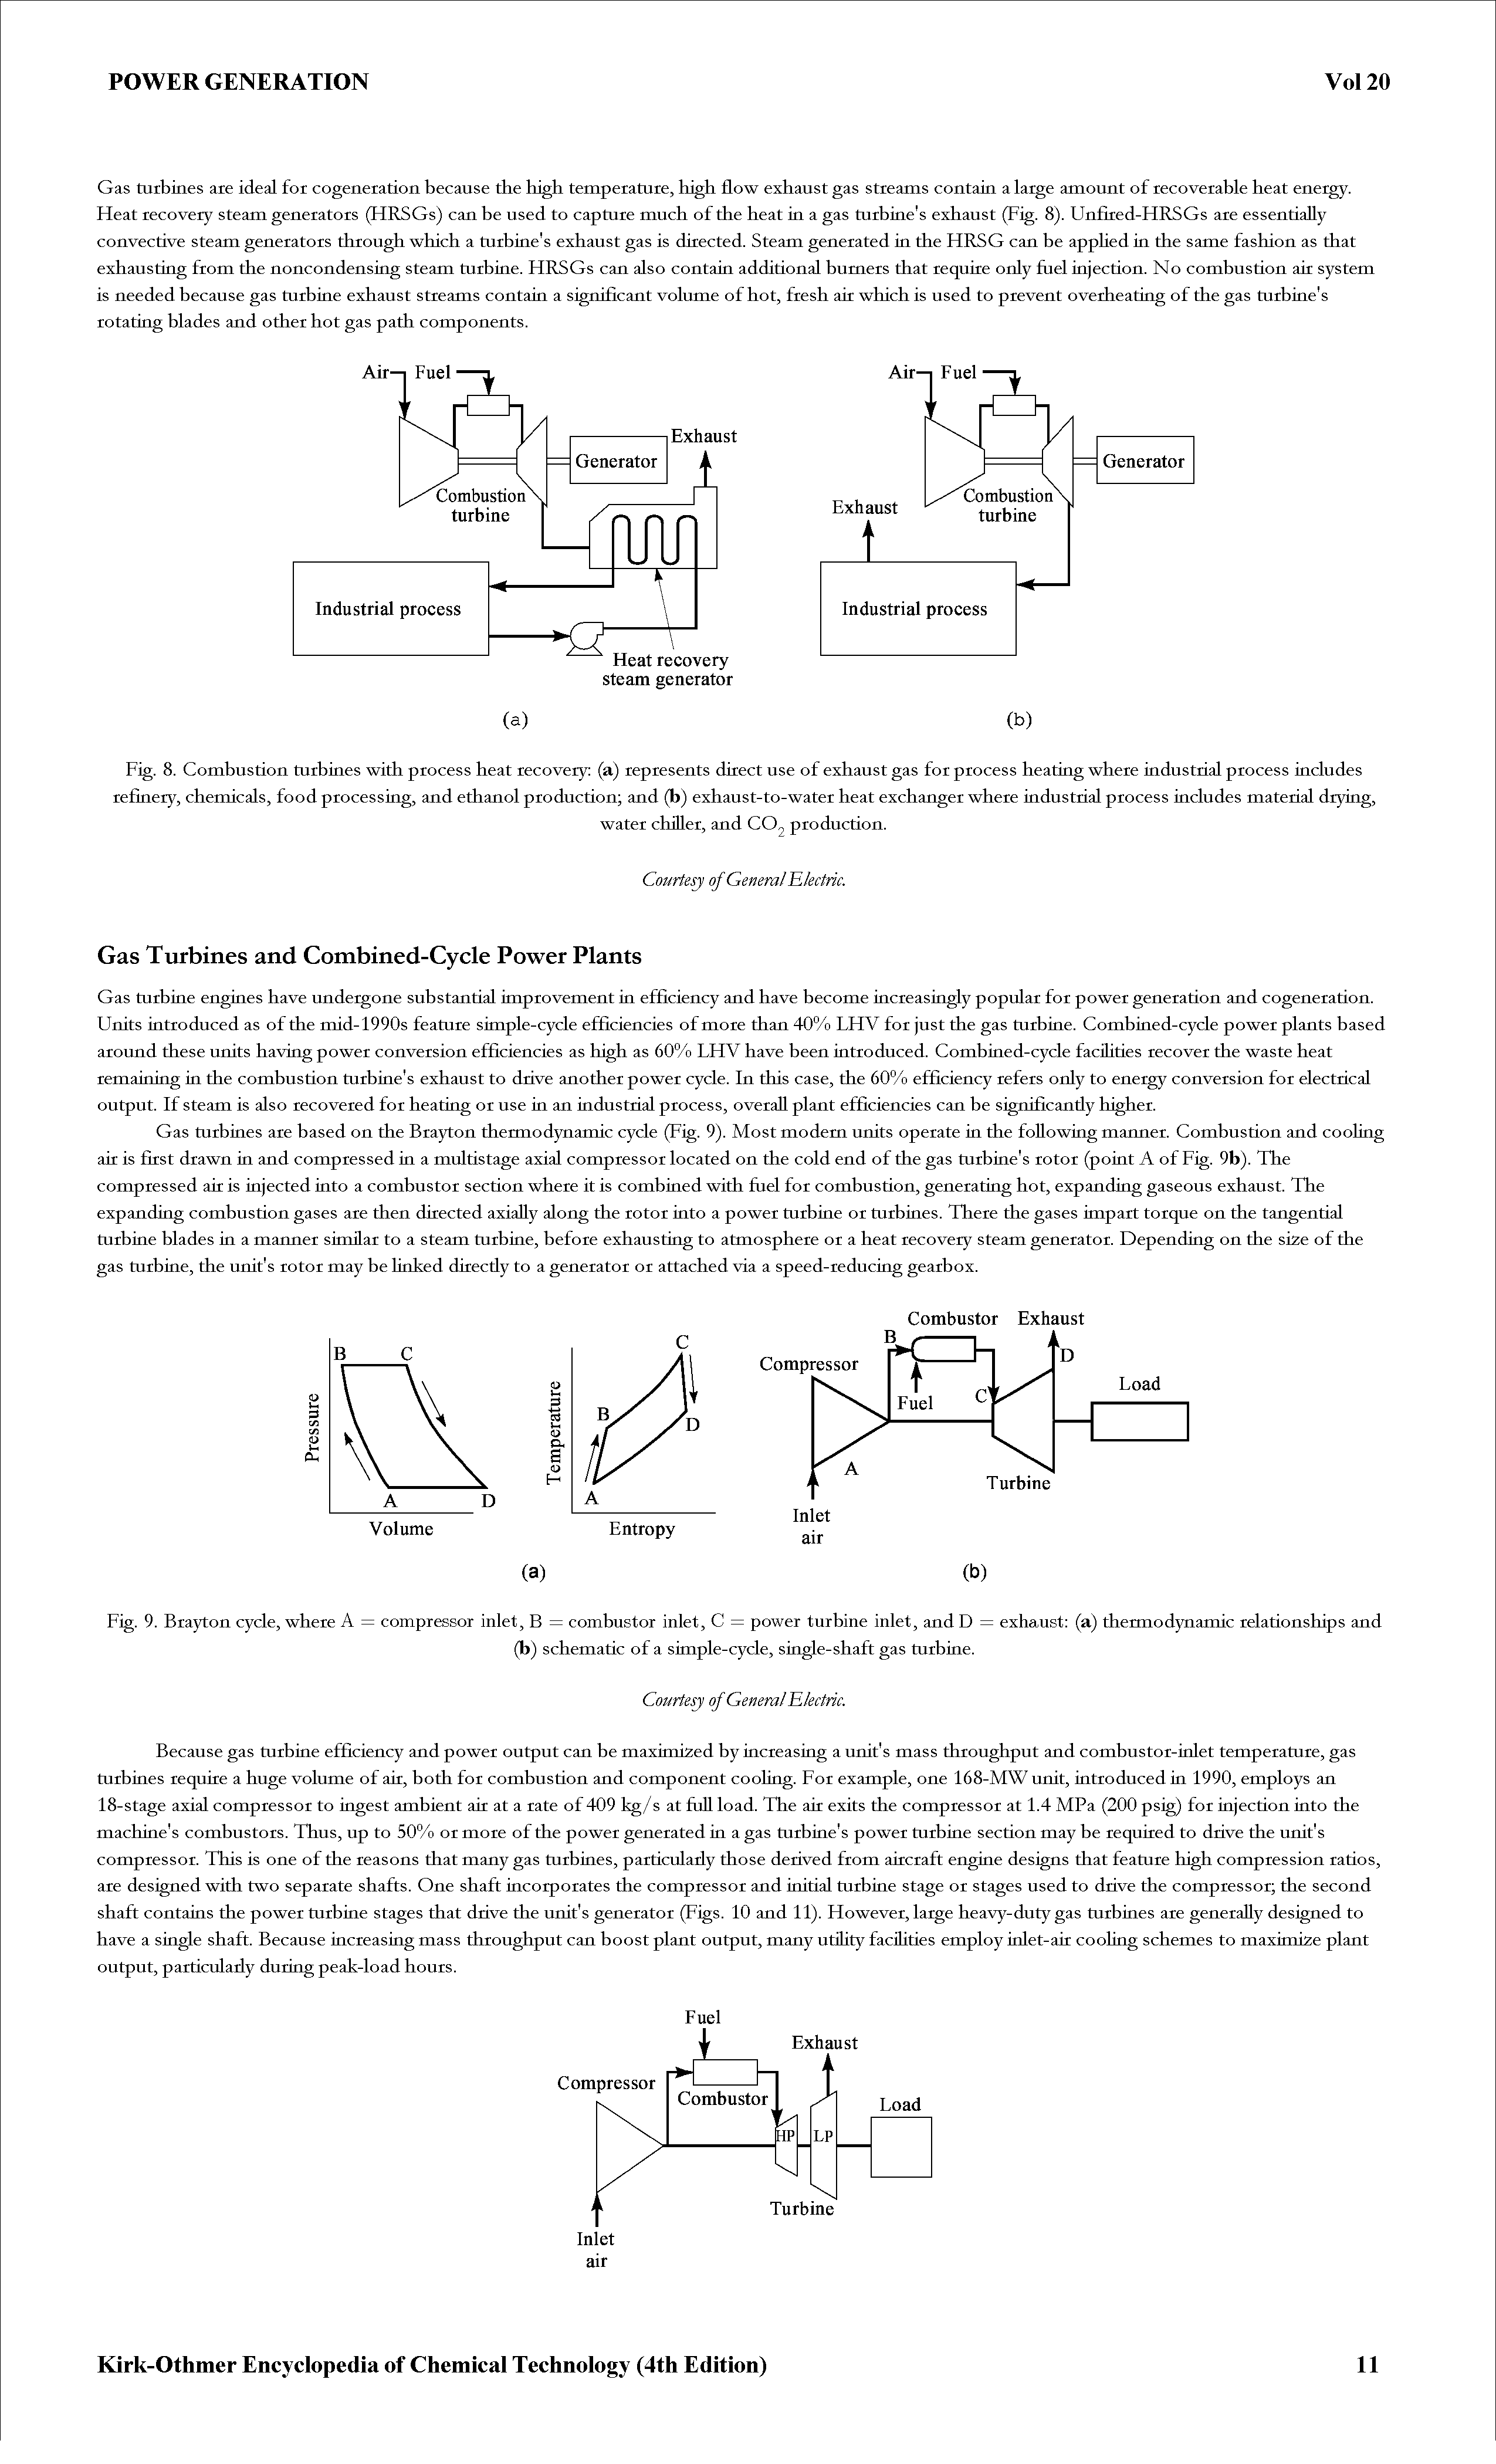 Fig. 9. Brayton cycle, where A = compressor inlet, B = combustor inlet, C = power turbine inlet, and D = exhaust (a) thermodynamic relationships and...